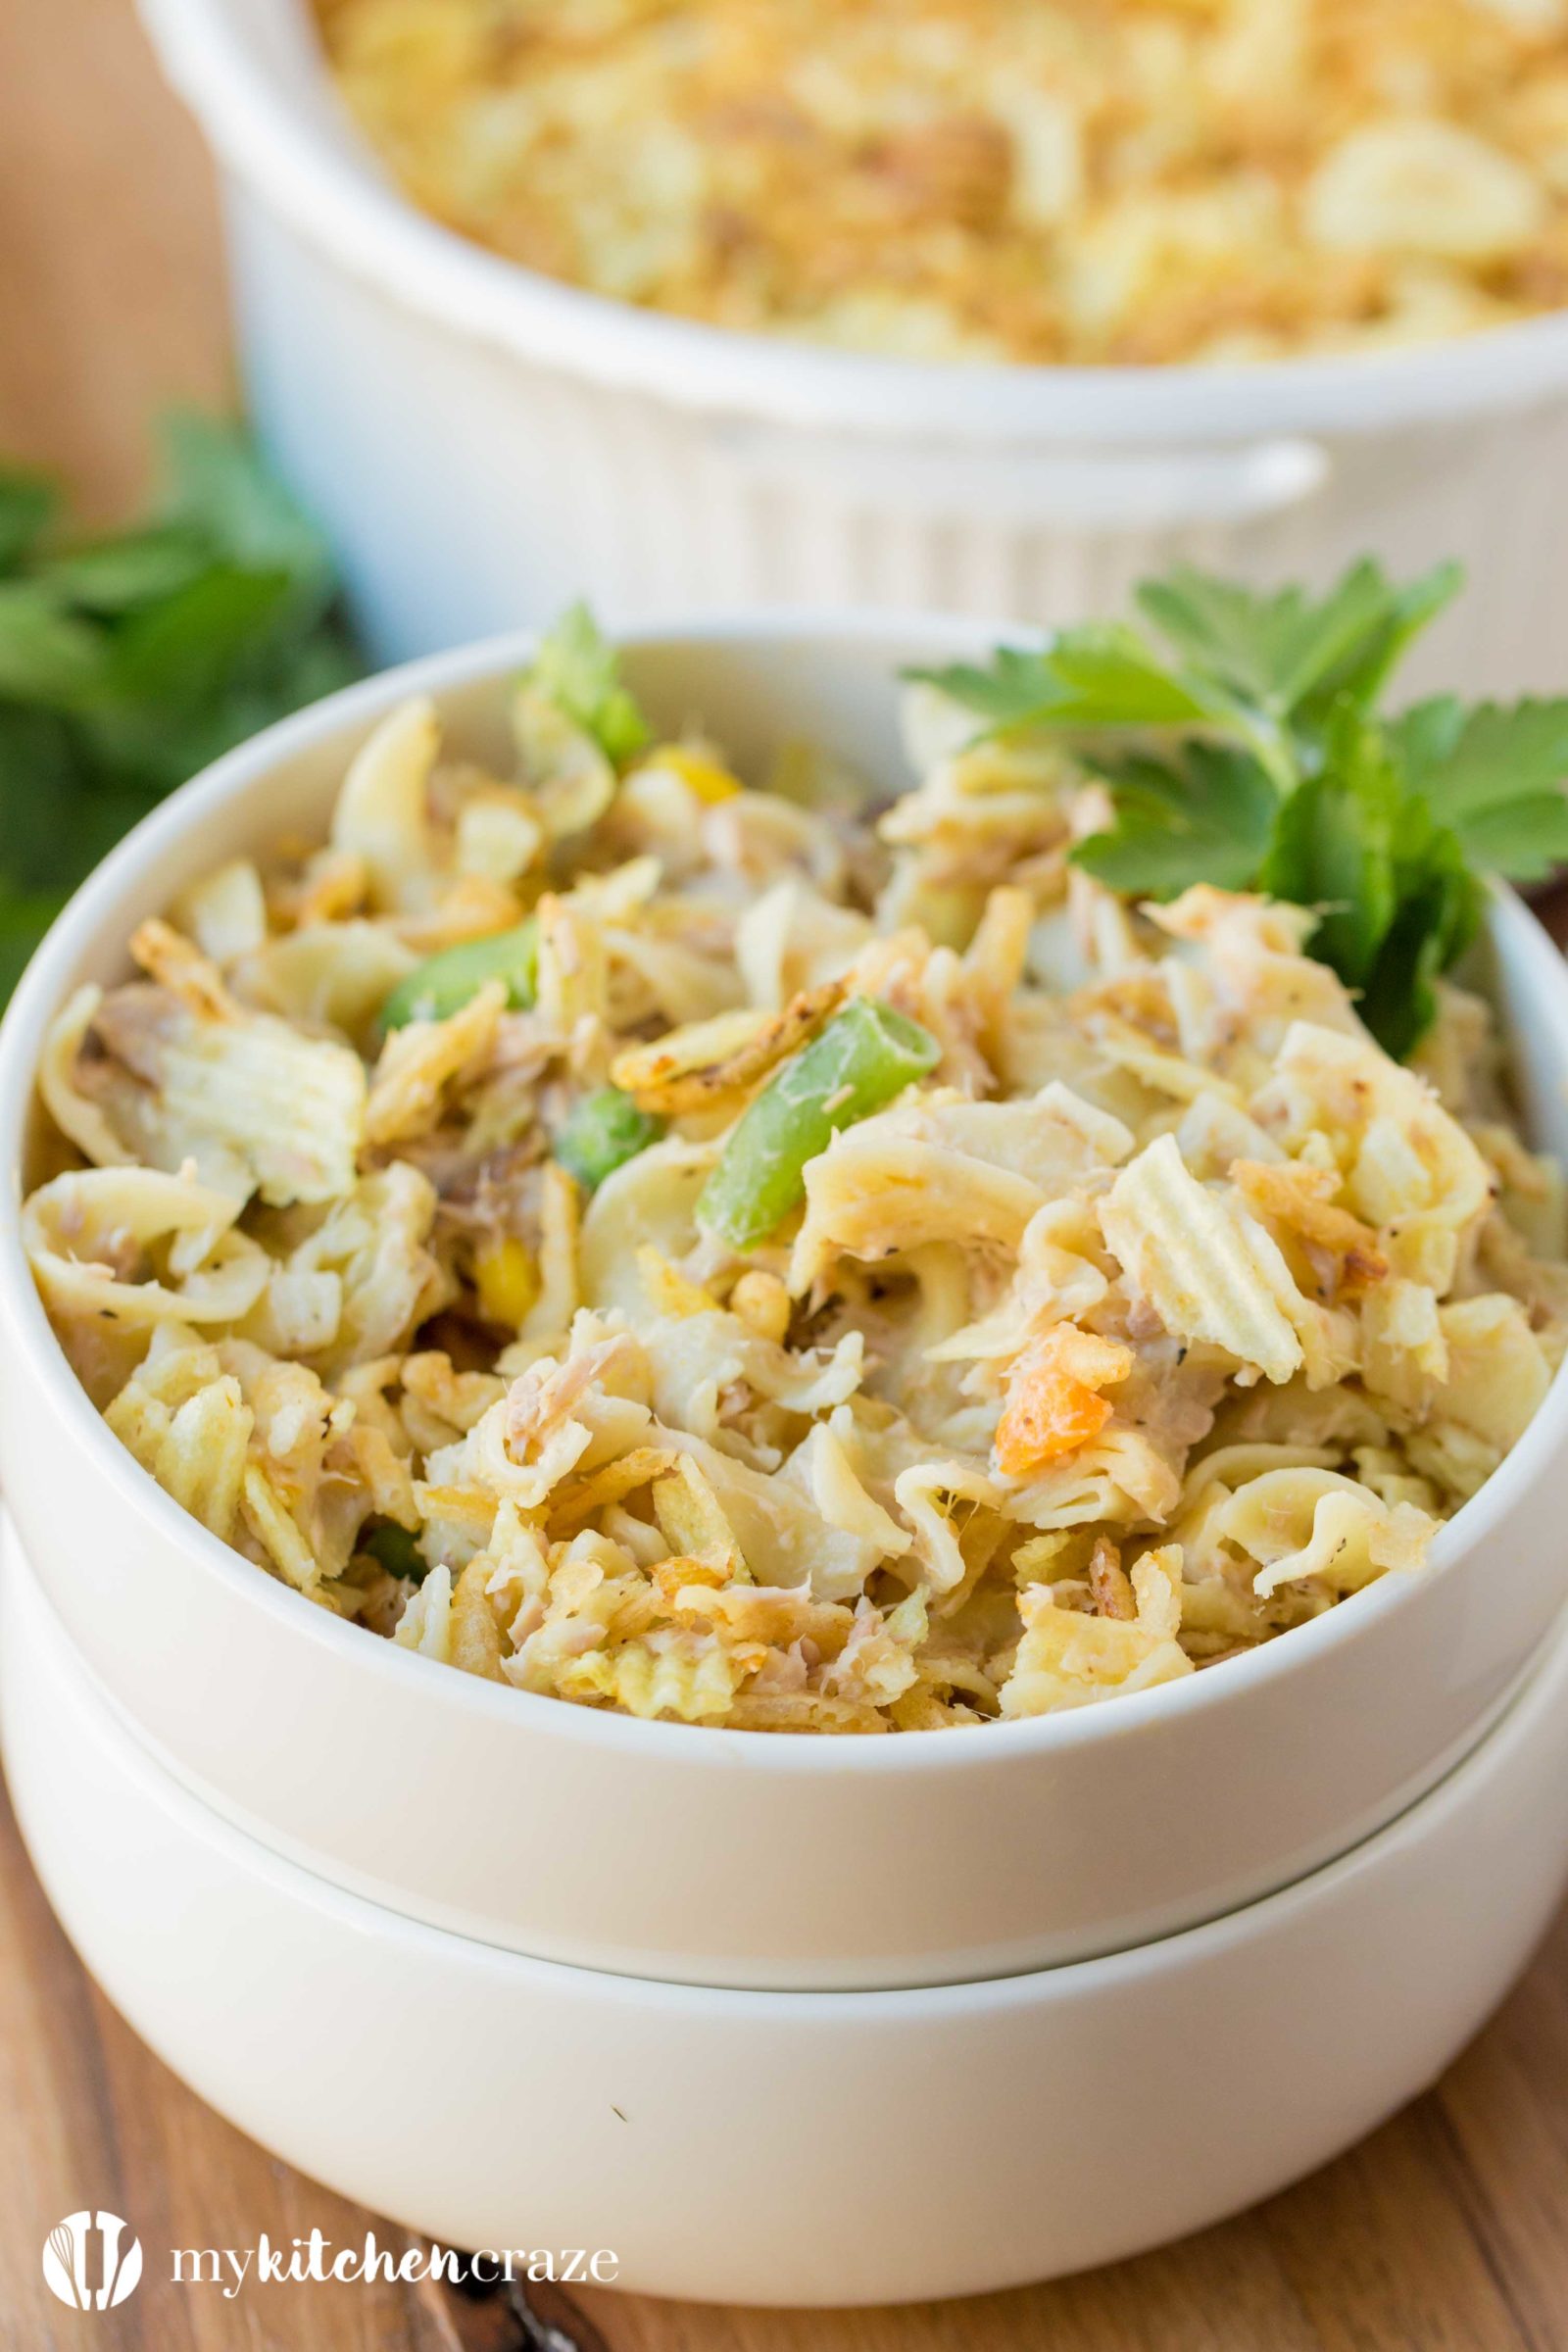 This easy, delicious Tuna Casserole can be on your table within 30 minutes. Perfect for those busy nights you don't want to be in the kitchen.